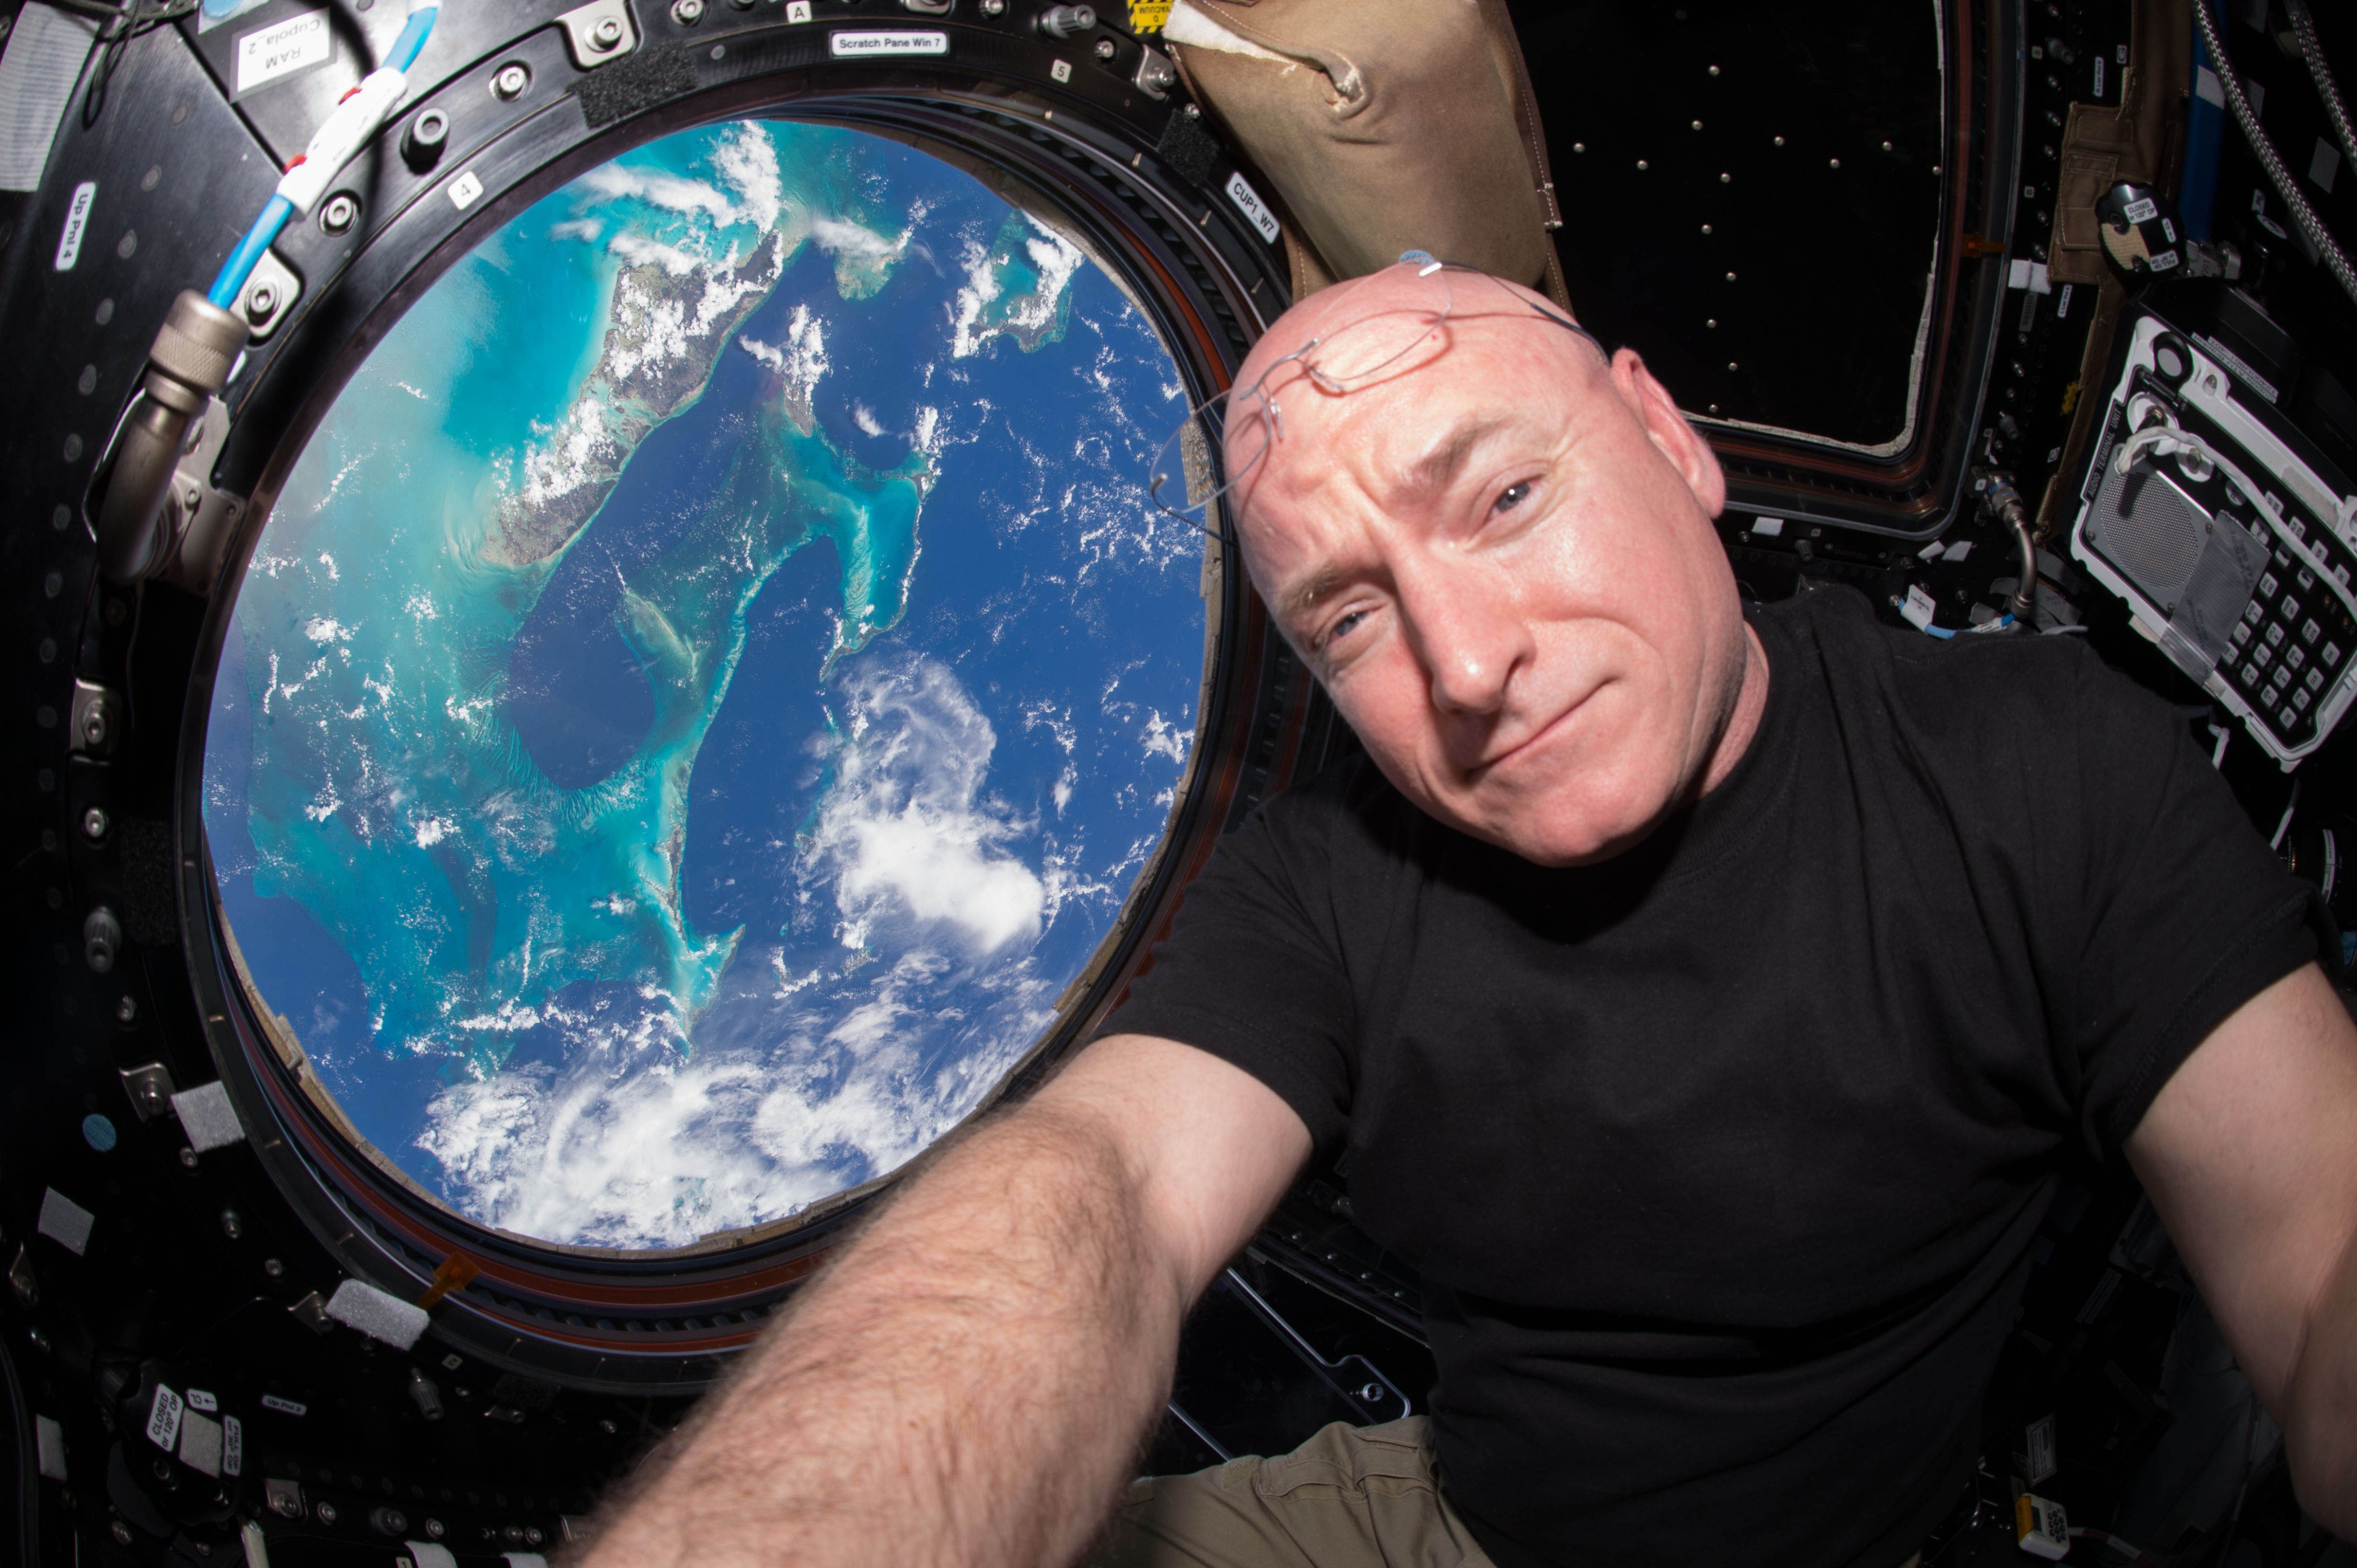 Scott Kelly poses for a selfie photo in the "Cupola" of the International Space Station. (Scott Kelly—AP)